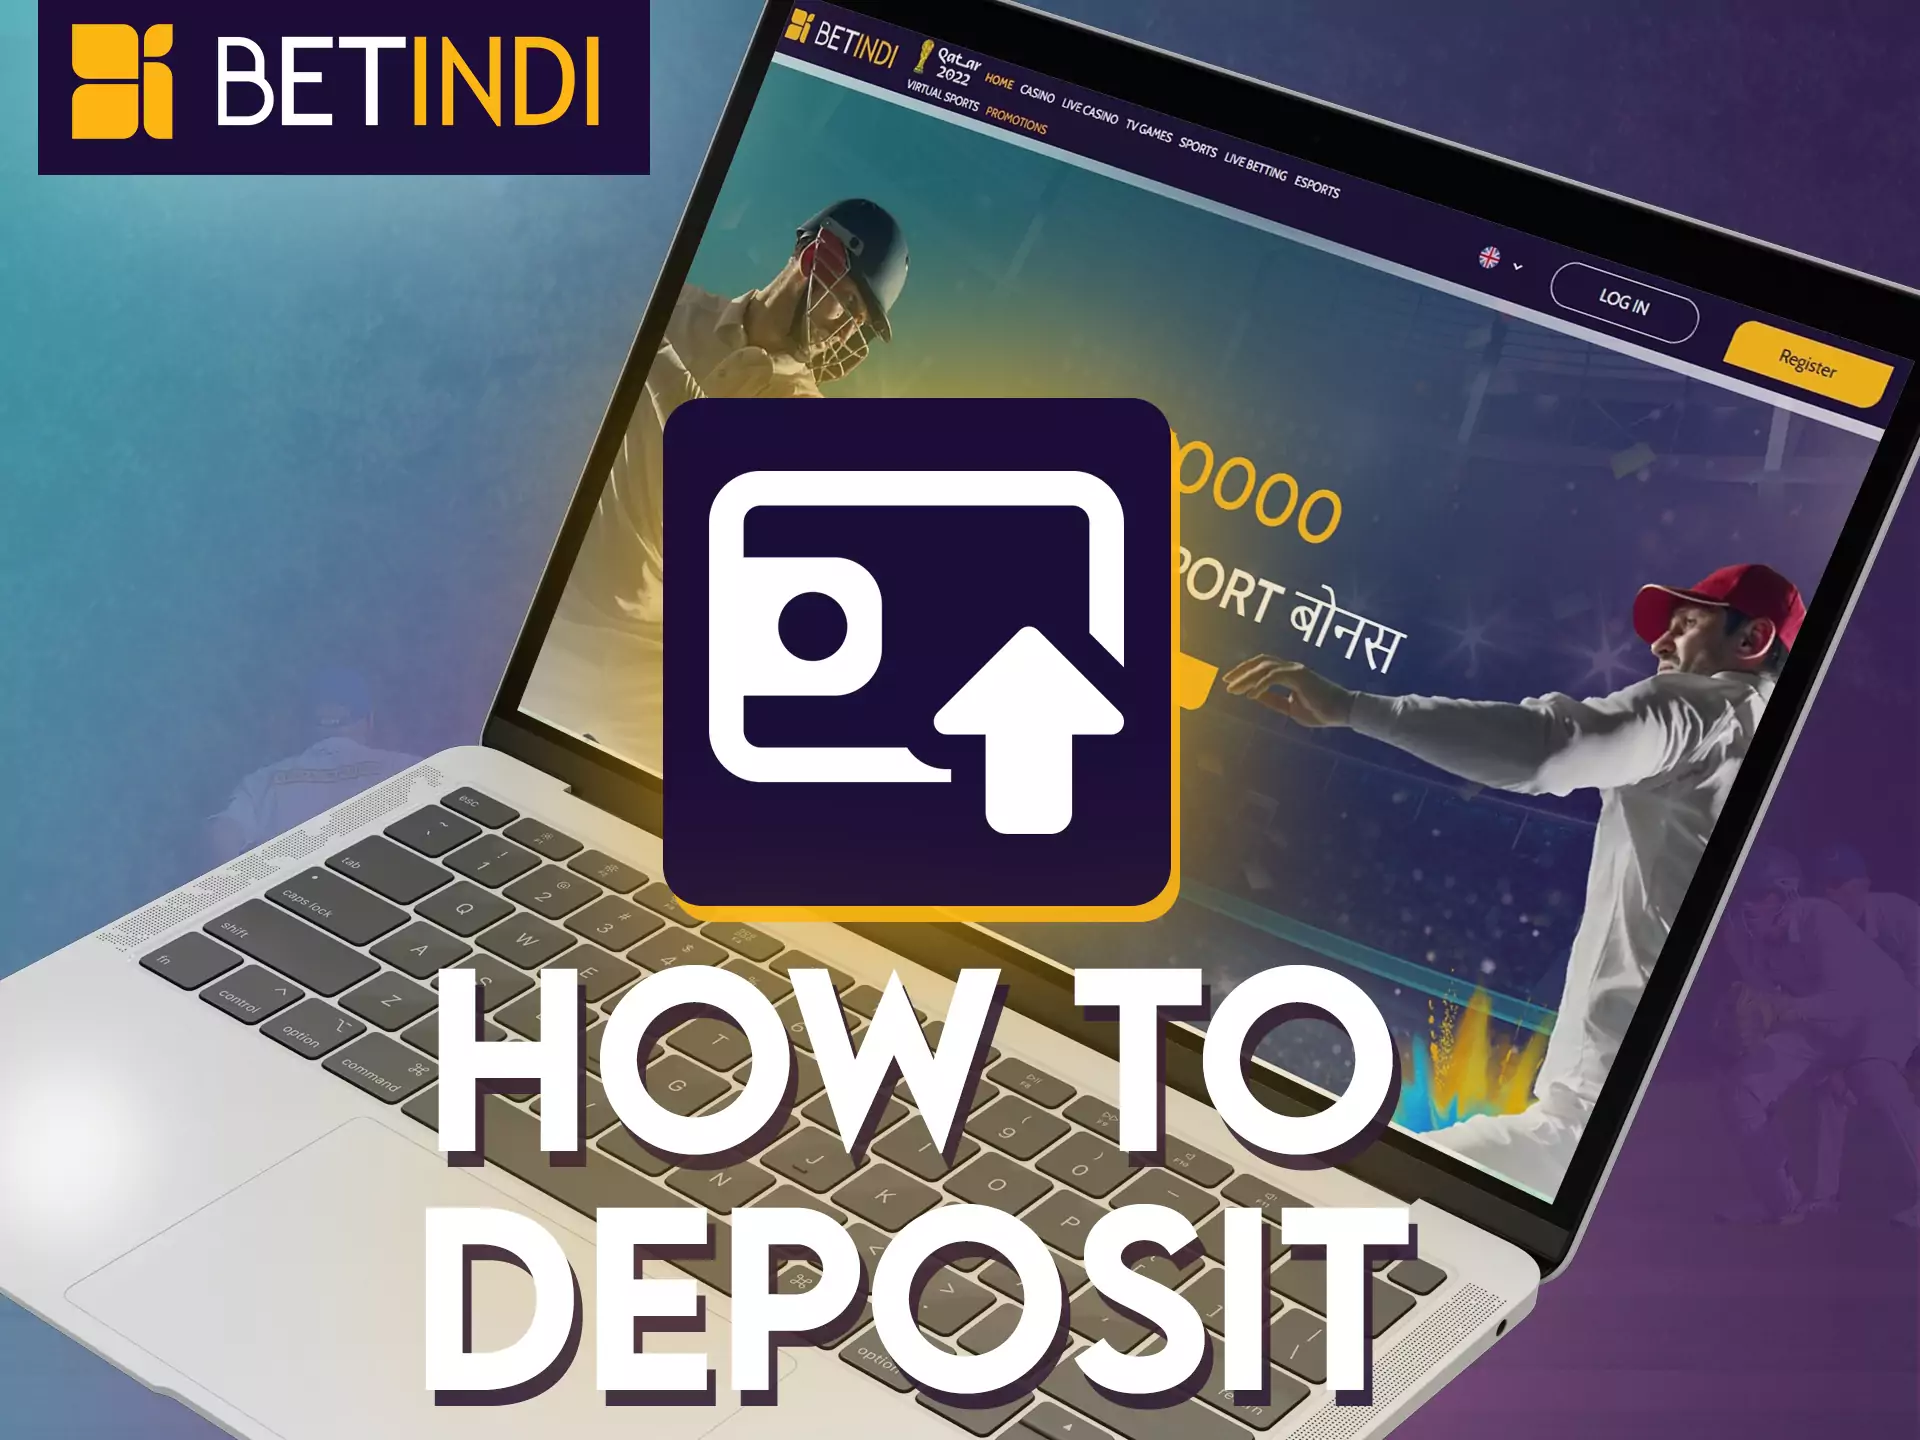 Find out how to deposit your Betindi account.